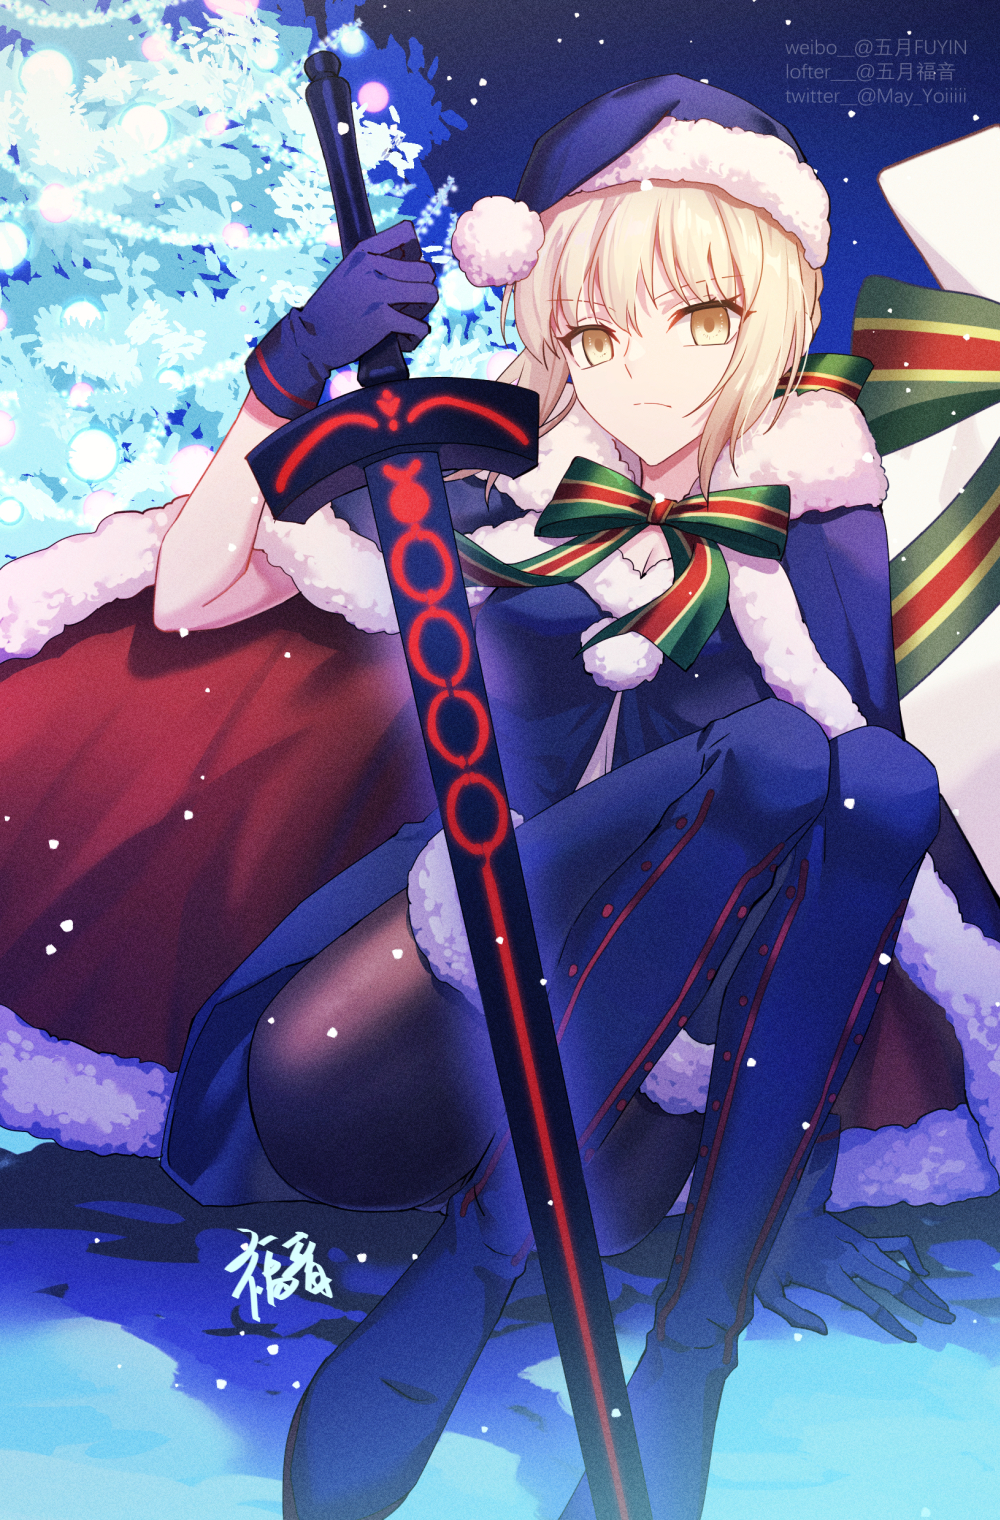 1girl artoria_pendragon_(fate) bangs black_legwear blonde_hair blue_cloak blue_dress blue_footwear blue_gloves blue_headwear blue_legwear boots brown_eyes cloak closed_mouth commentary dress english_commentary excalibur_morgan_(fate) eyebrows_visible_through_hair fate/grand_order fate_(series) fur-trimmed_boots fur-trimmed_cloak fur-trimmed_headwear fur-trimmed_legwear fur_trim gloves gogatsu_fukuin hat highres holding holding_sword holding_weapon lofter_username pantyhose sack santa_alter santa_hat solo sword thigh-highs thigh_boots twitter_username weapon weibo_username